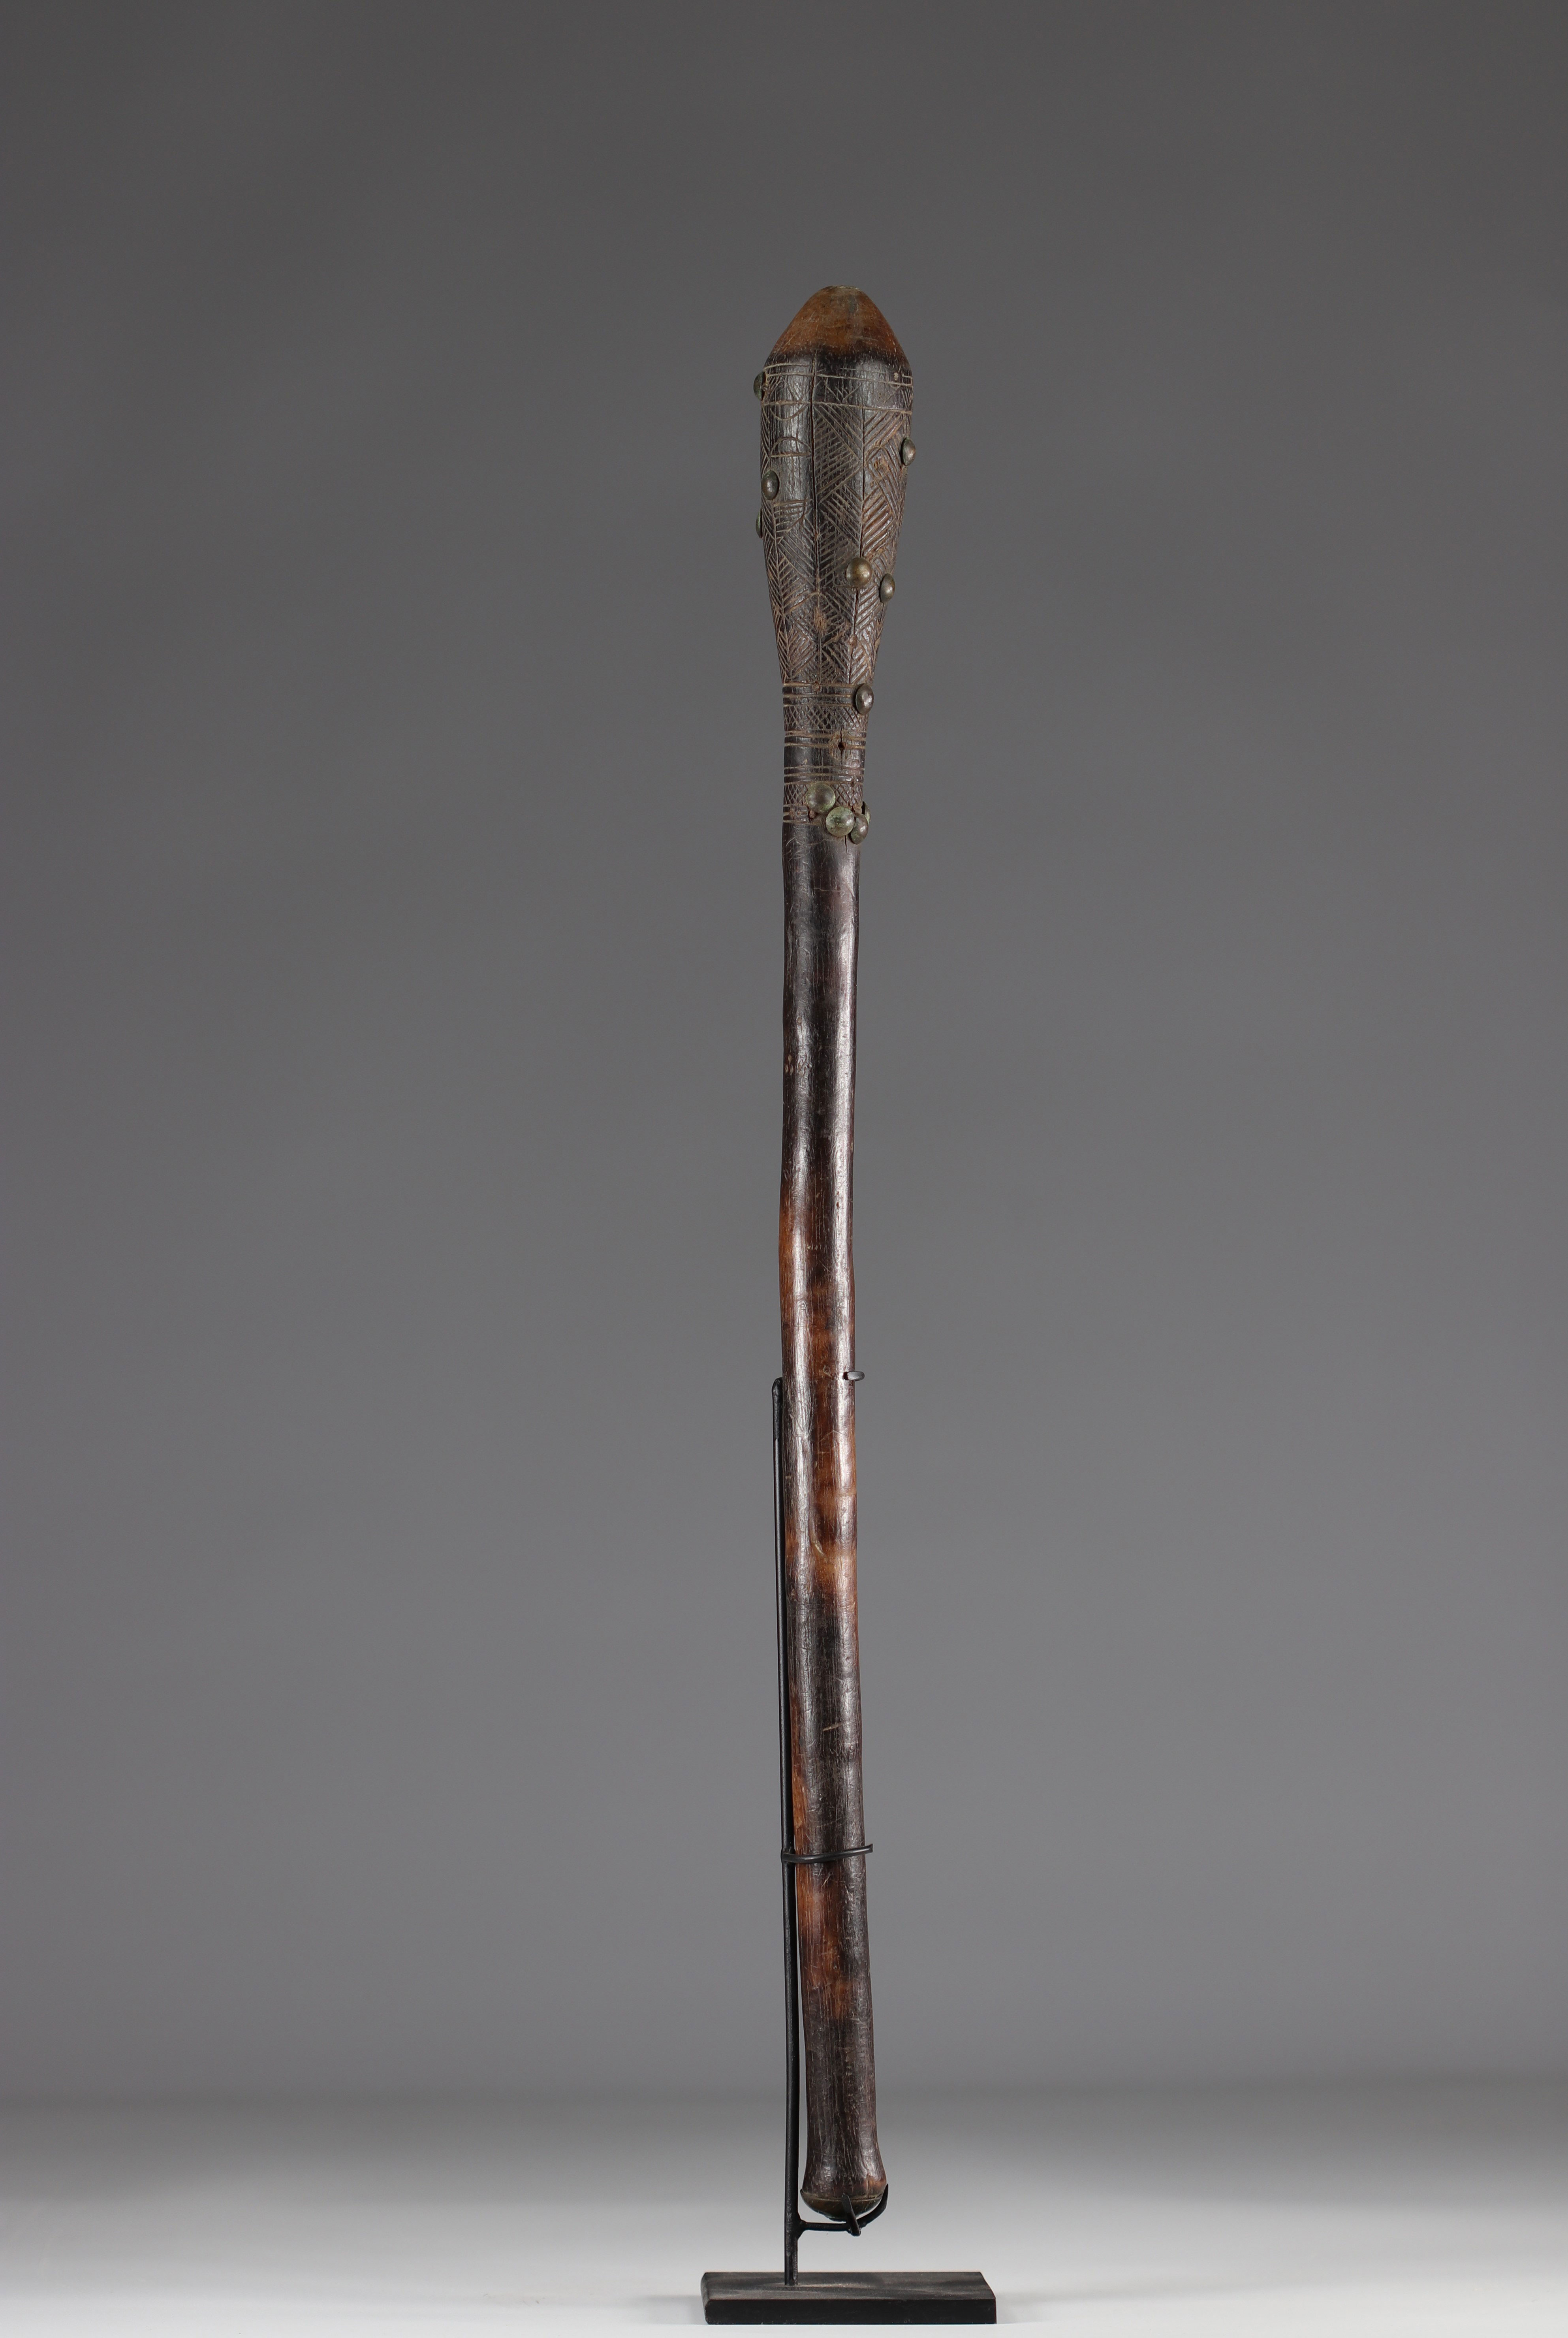 Tchokwe club - coll. private Belgian - early 20th century - DRC - Africa - Image 2 of 3